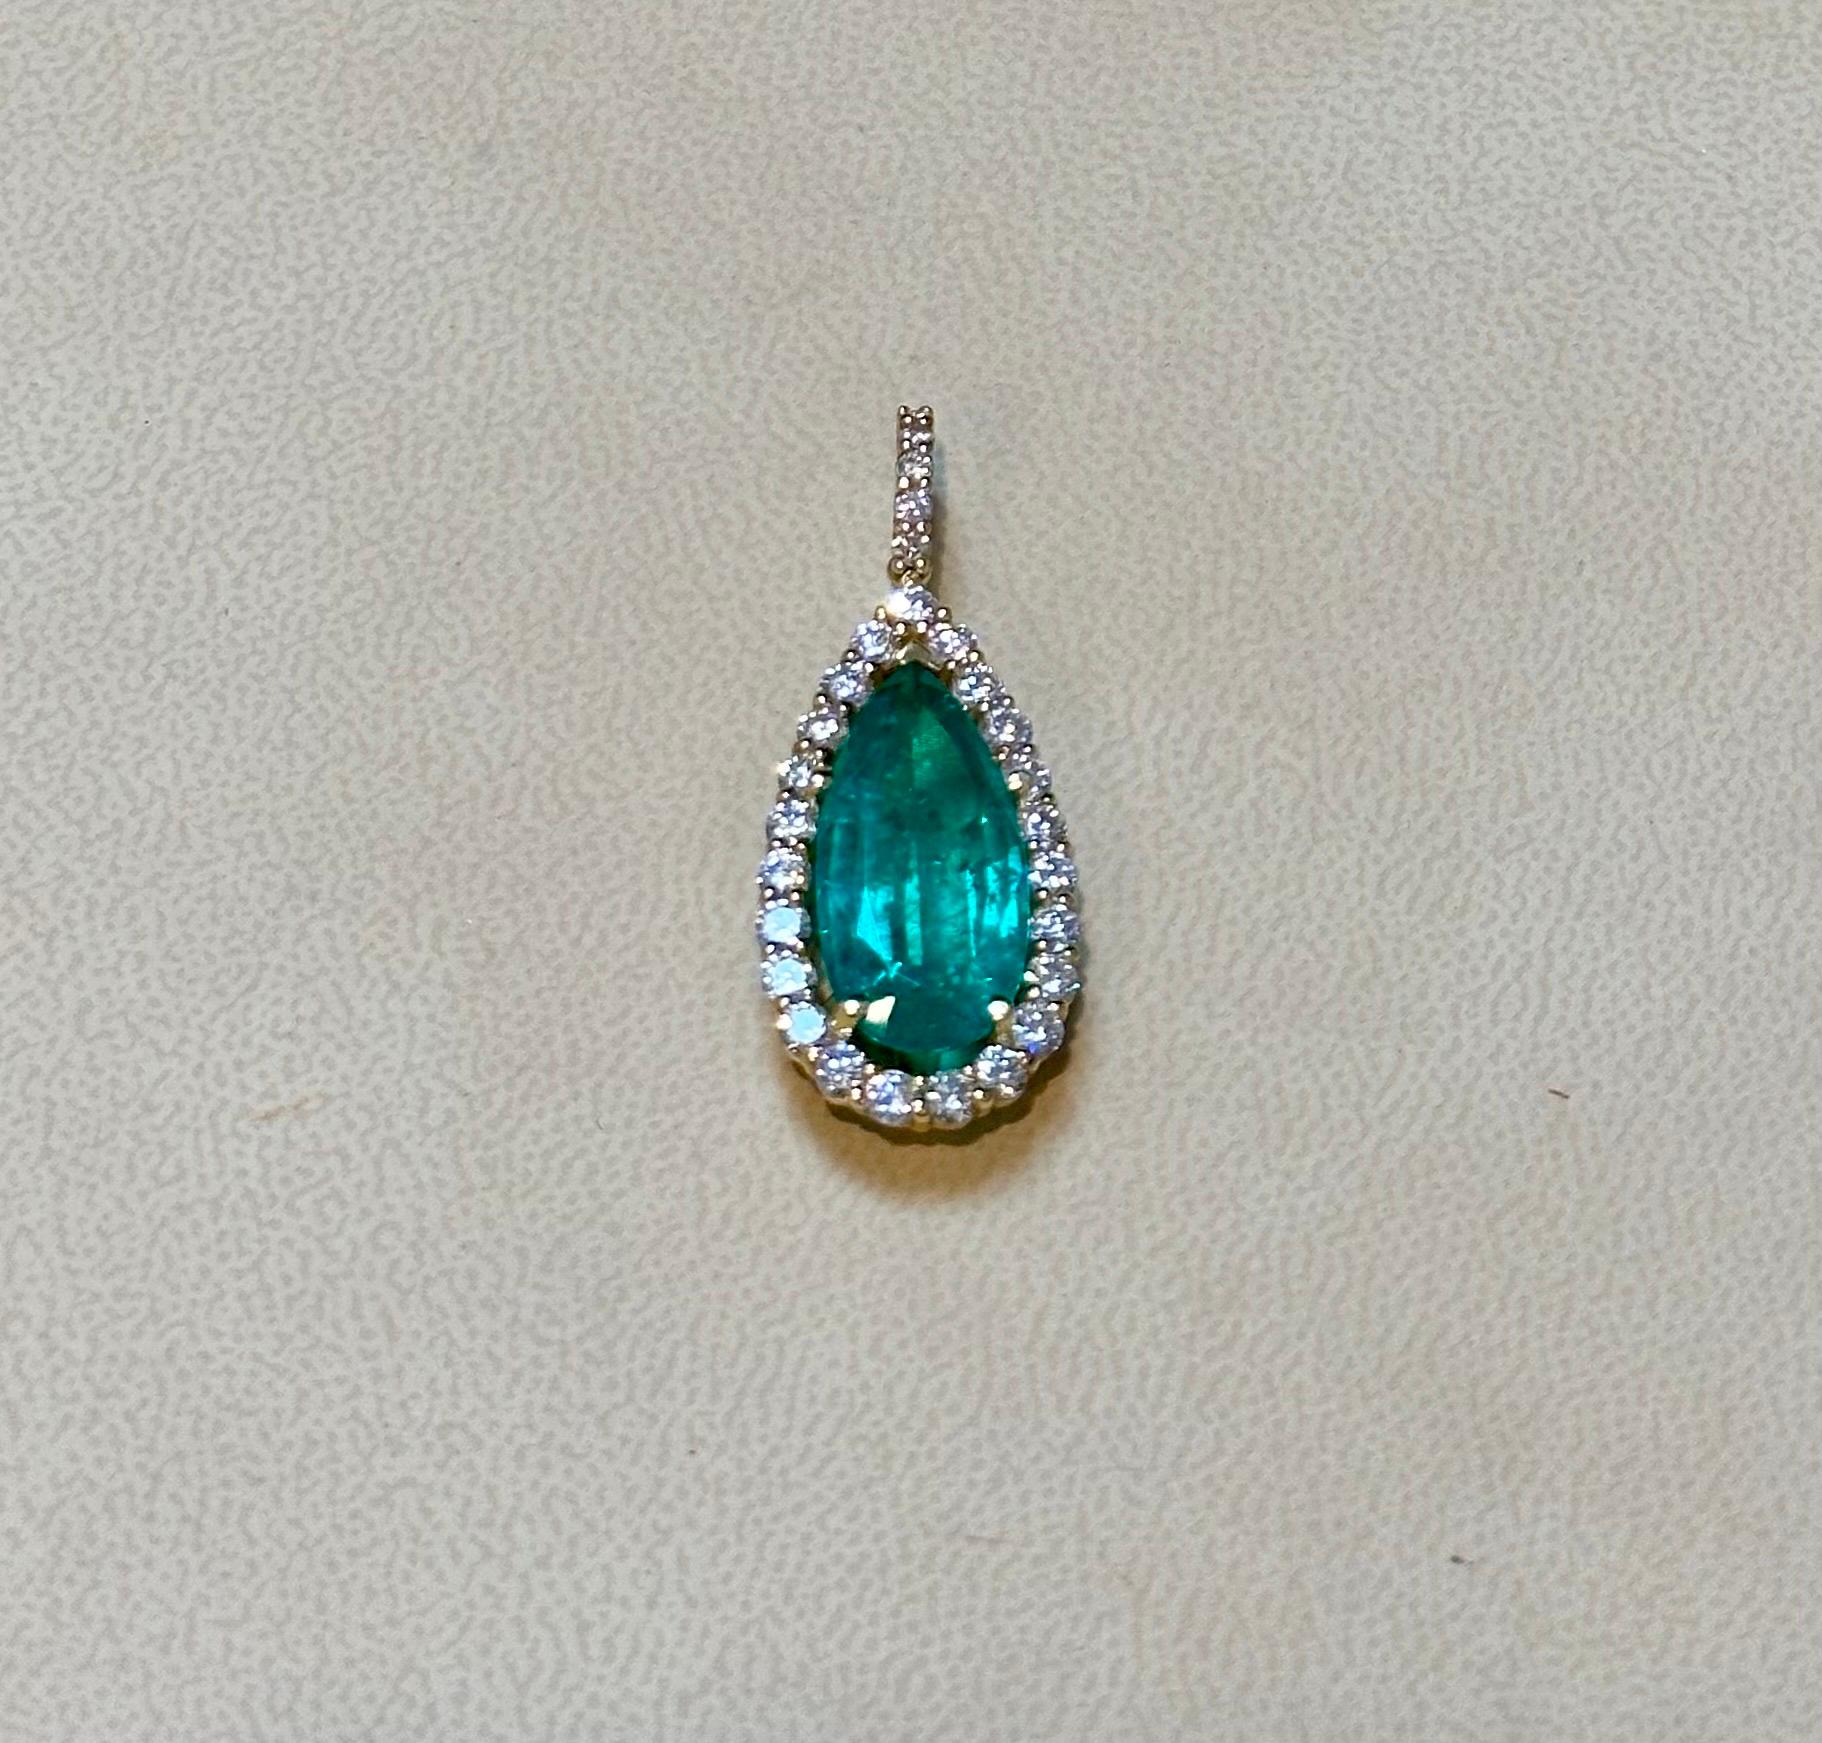 Introducing our extraordinary pendant necklace enhancer featuring an approximately 11 carat pear-shaped Colombian Emerald and a dazzling array of diamonds. This necklace is truly a sight to behold, showcasing the exquisite beauty of the emerald and